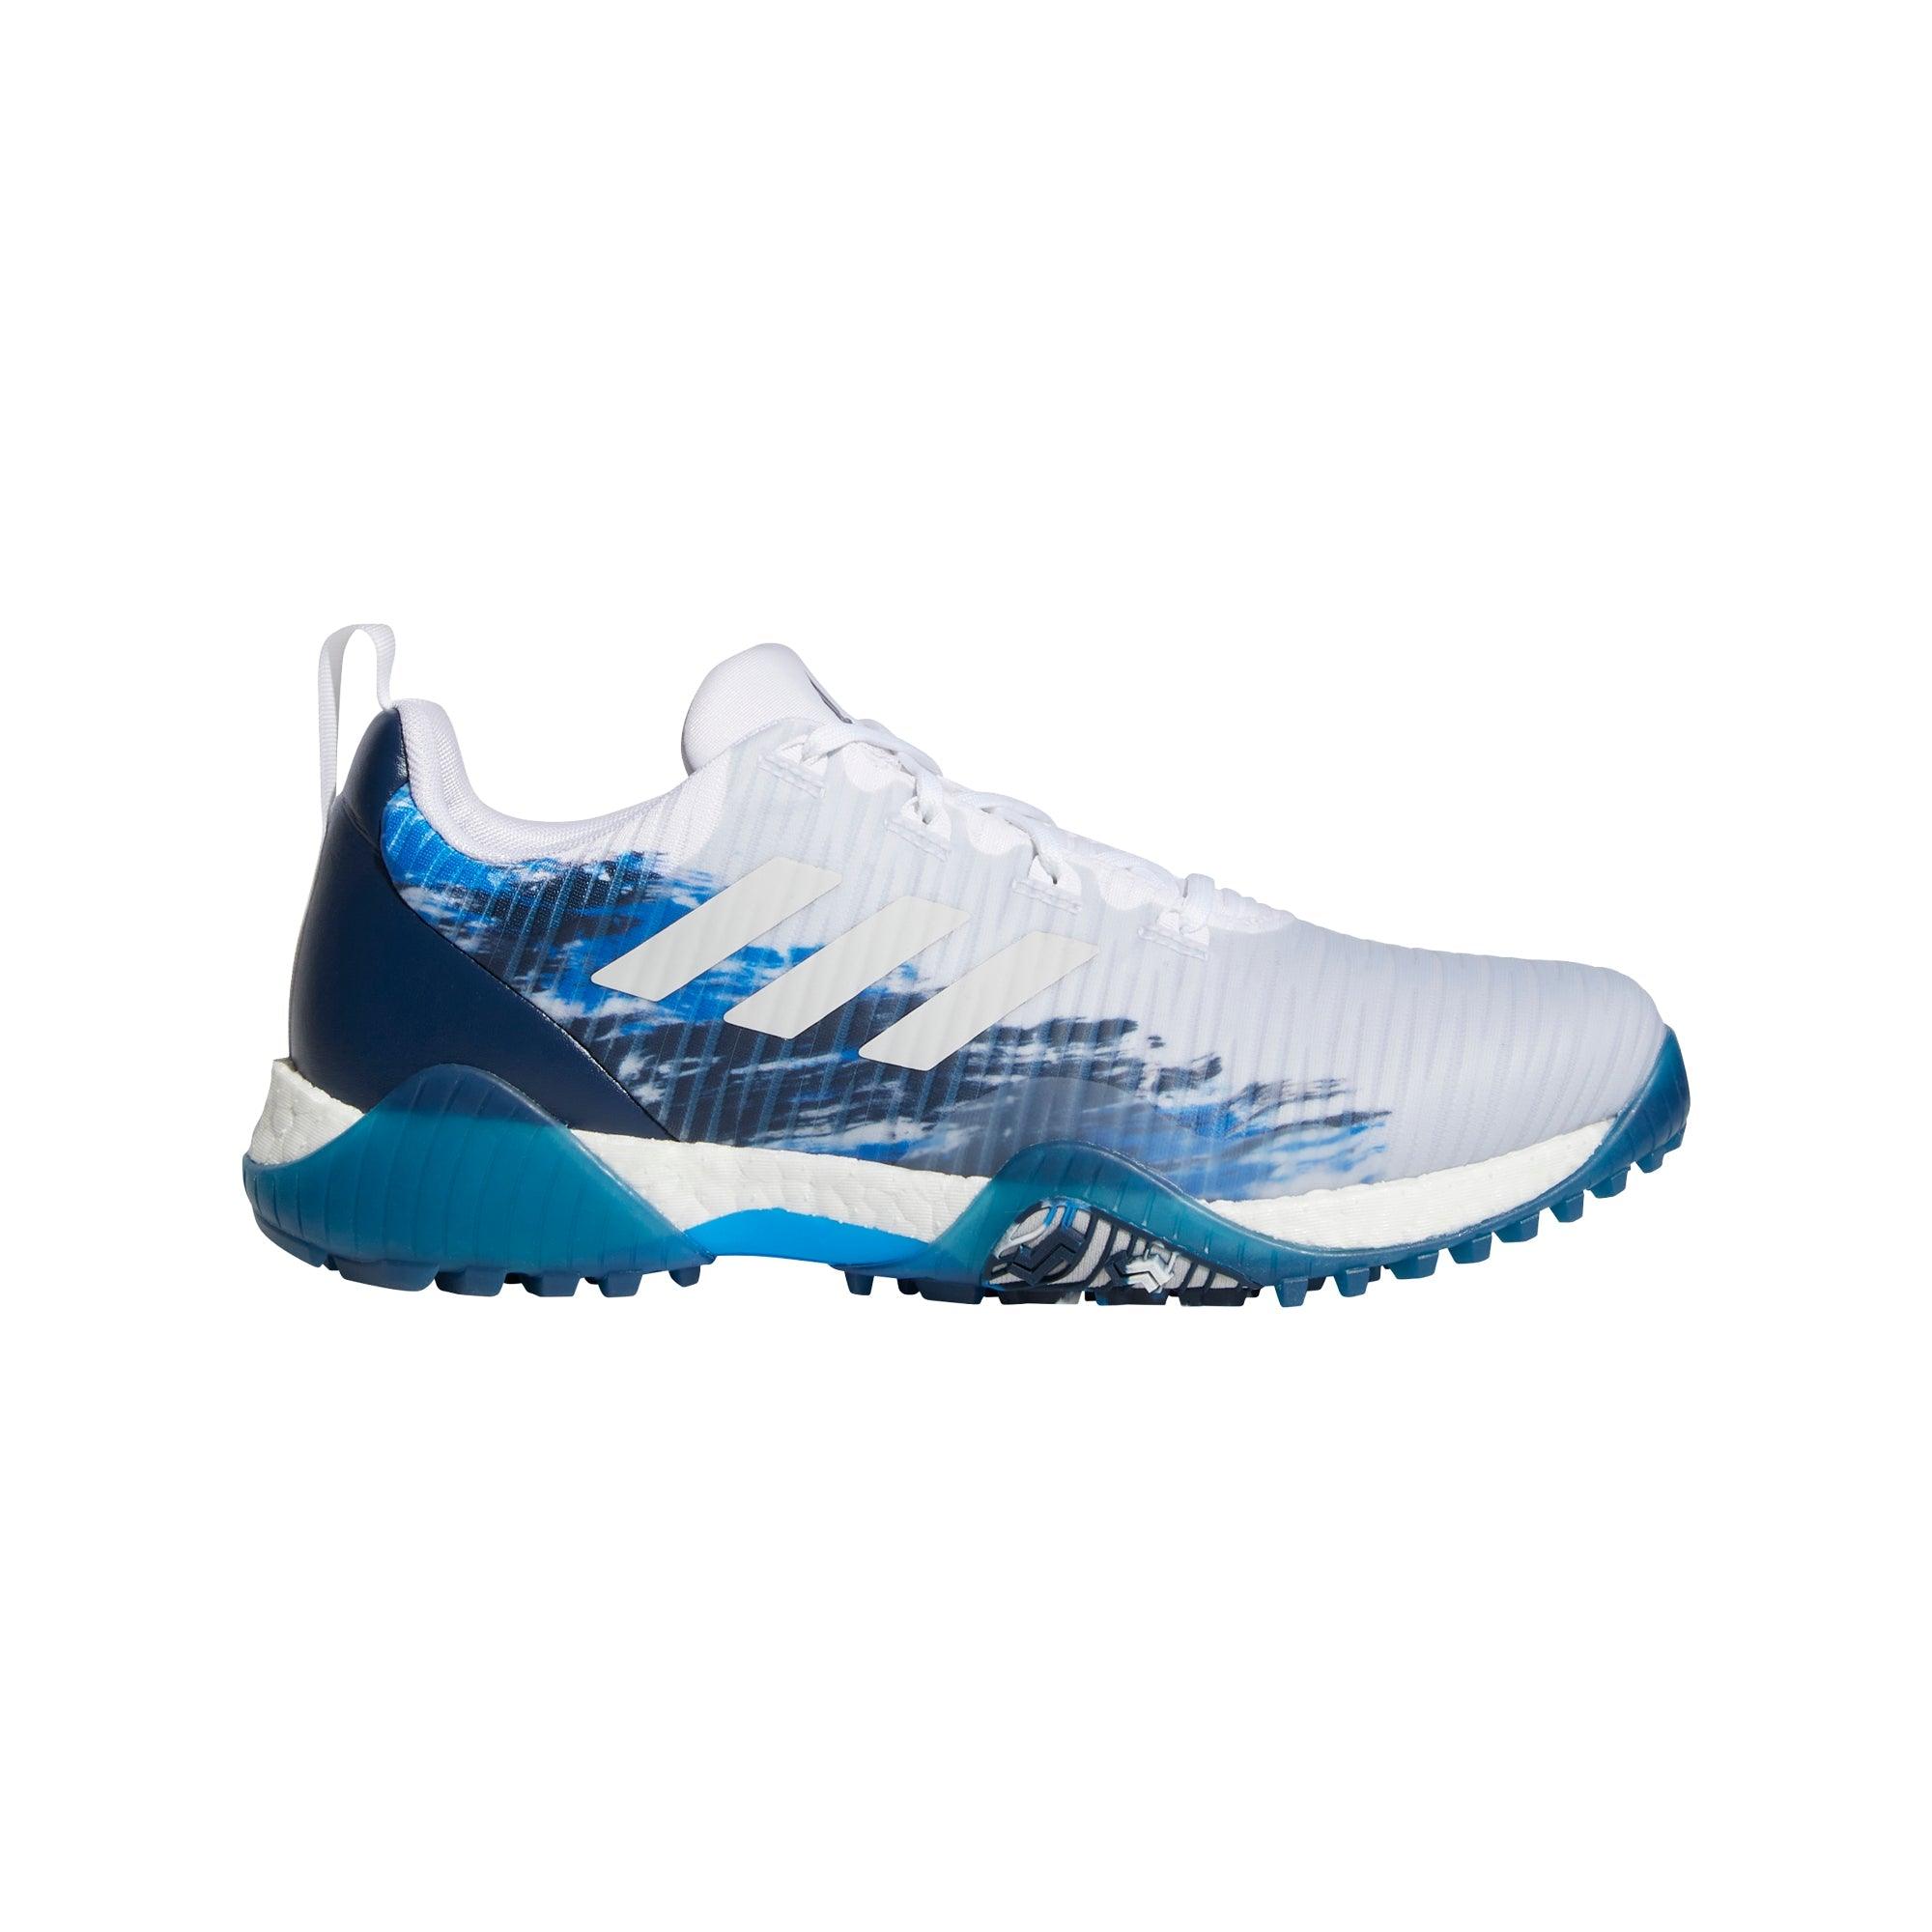  Adidas CodeChaos Limited Edition Men's Spikeless Golf Shoe Pacific Golf Warehouse ADIDAS 100-200, adidas, apparel, colour-core-black-core-black-pulse-lime, colour-red-white-canada, colour-white-grey-one-crew-navy, golf-show, mens-golf-shoes, size-10, size-10-5, size-11, size-11-5, size-12, size-15, size-8, size-8-5, size-9, size-9-5, under-100